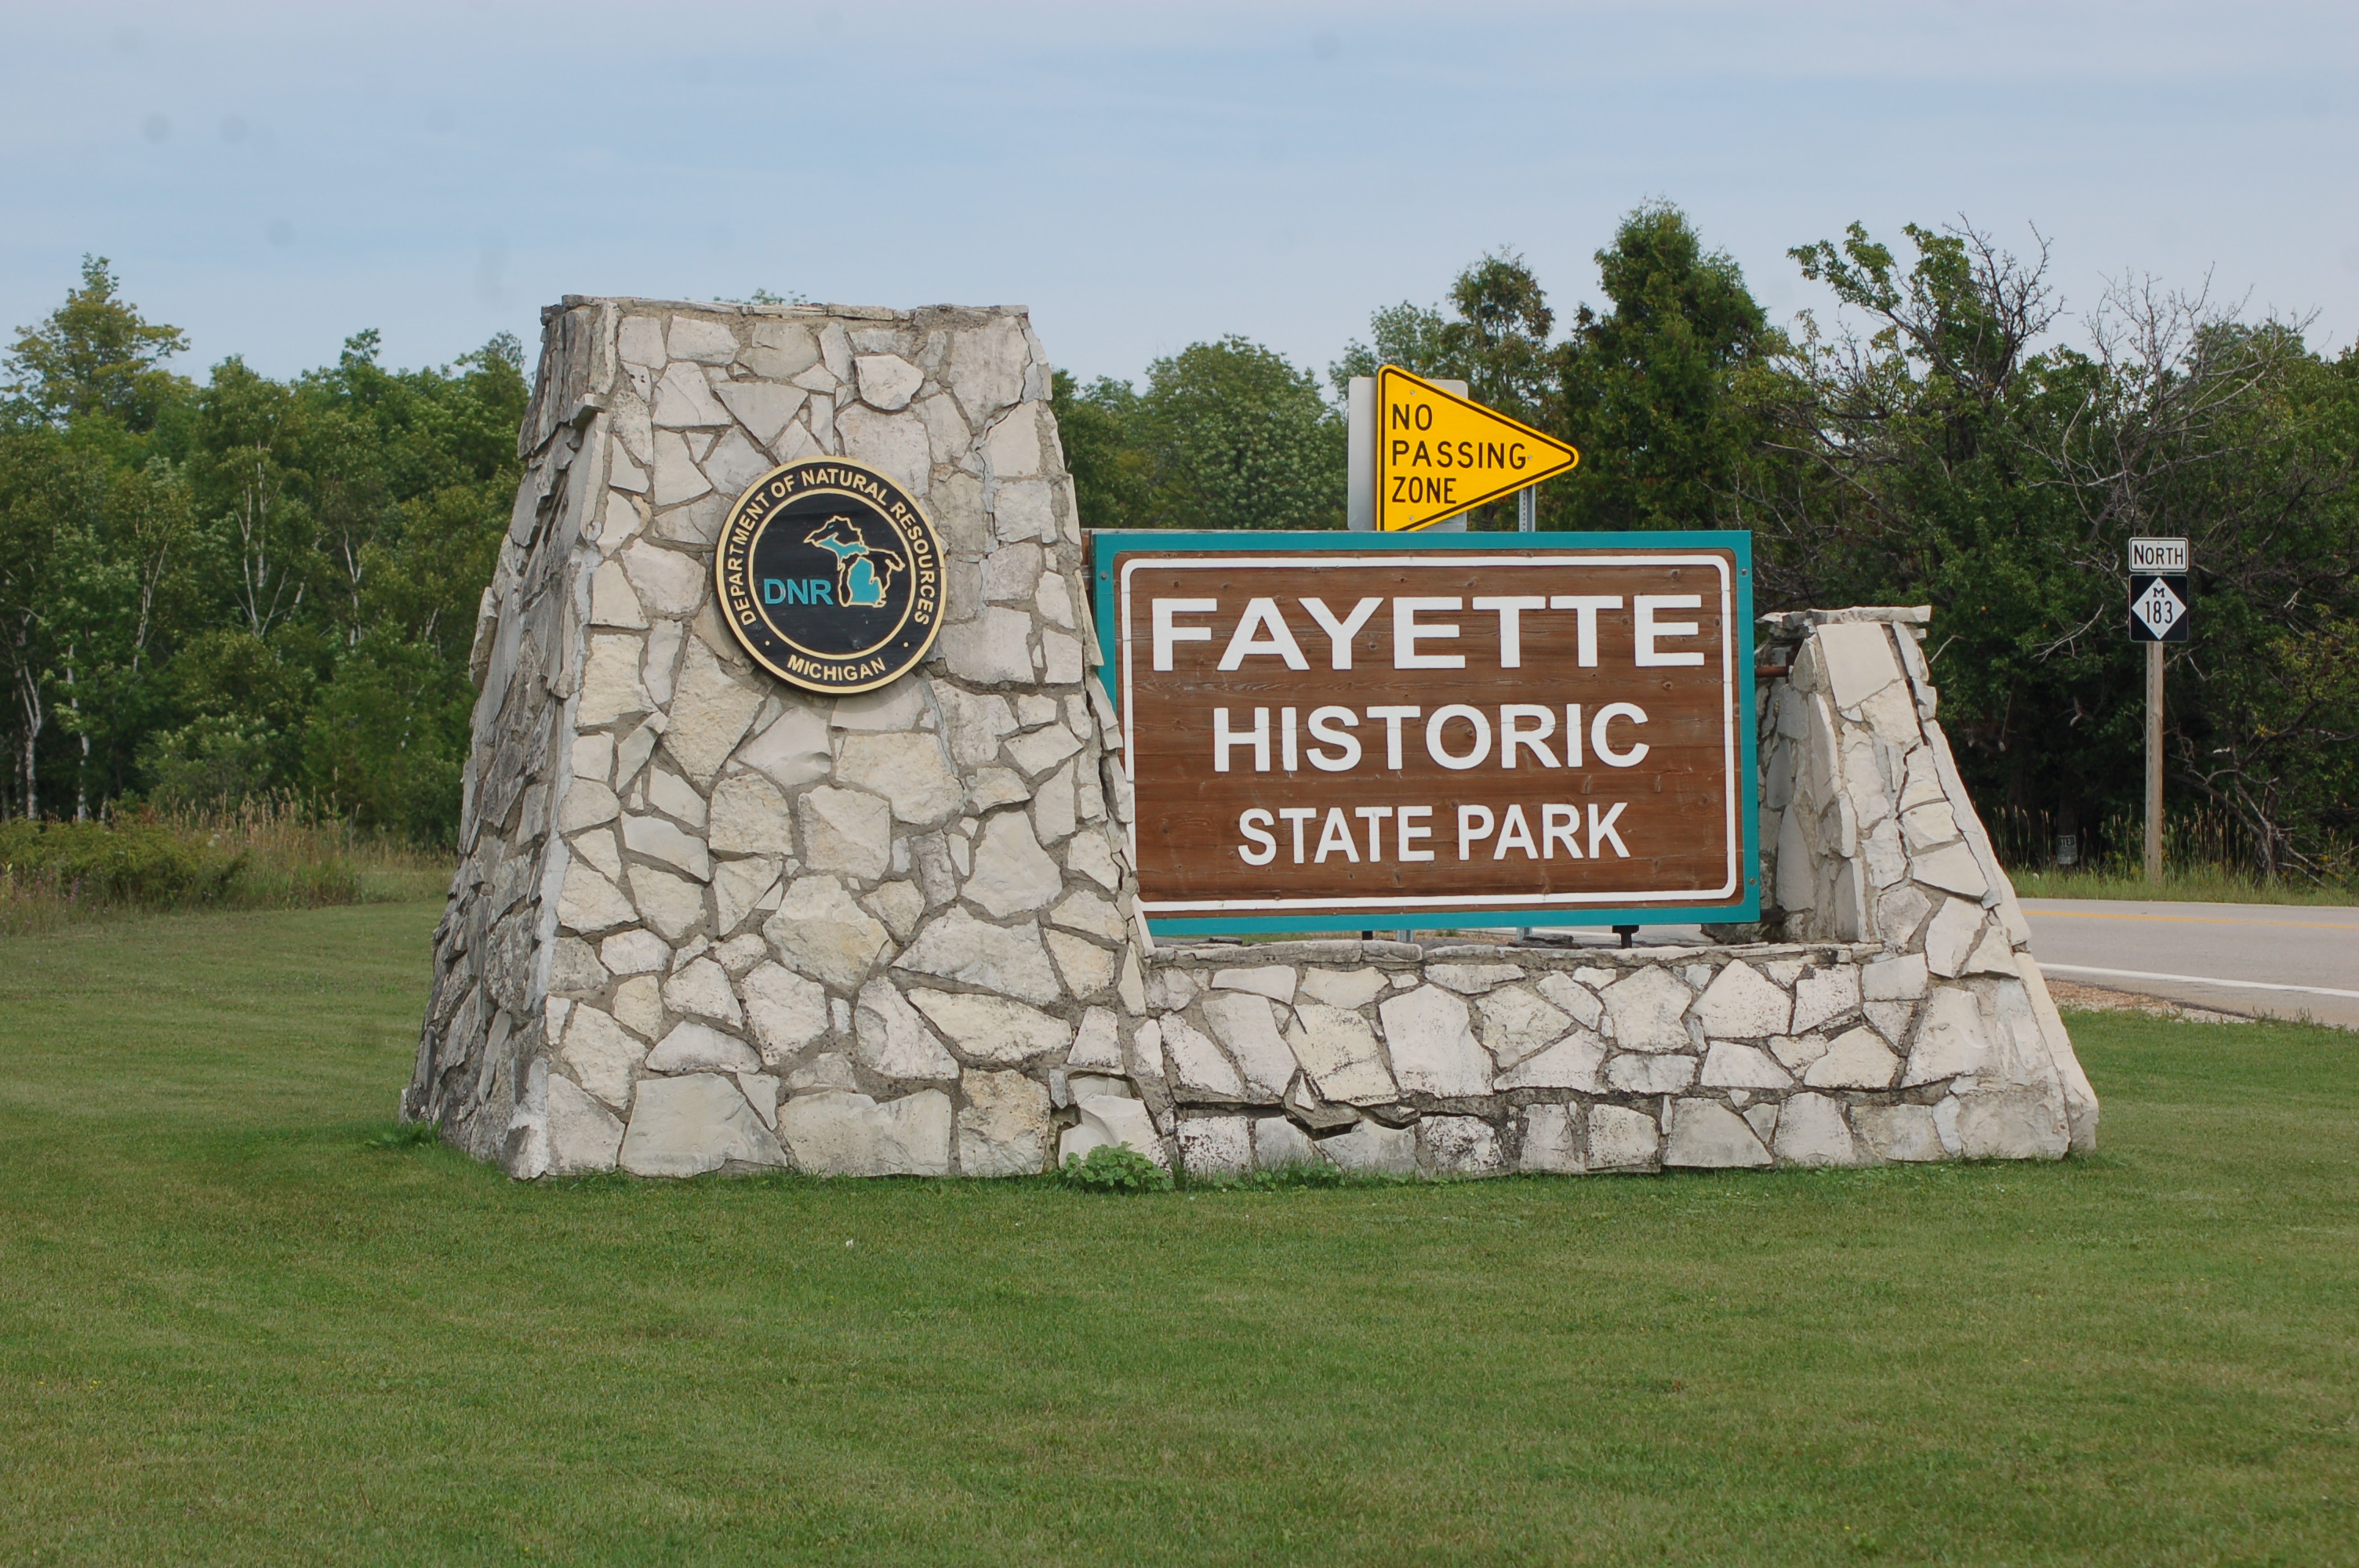 Welcome to Fayette Historic State Park